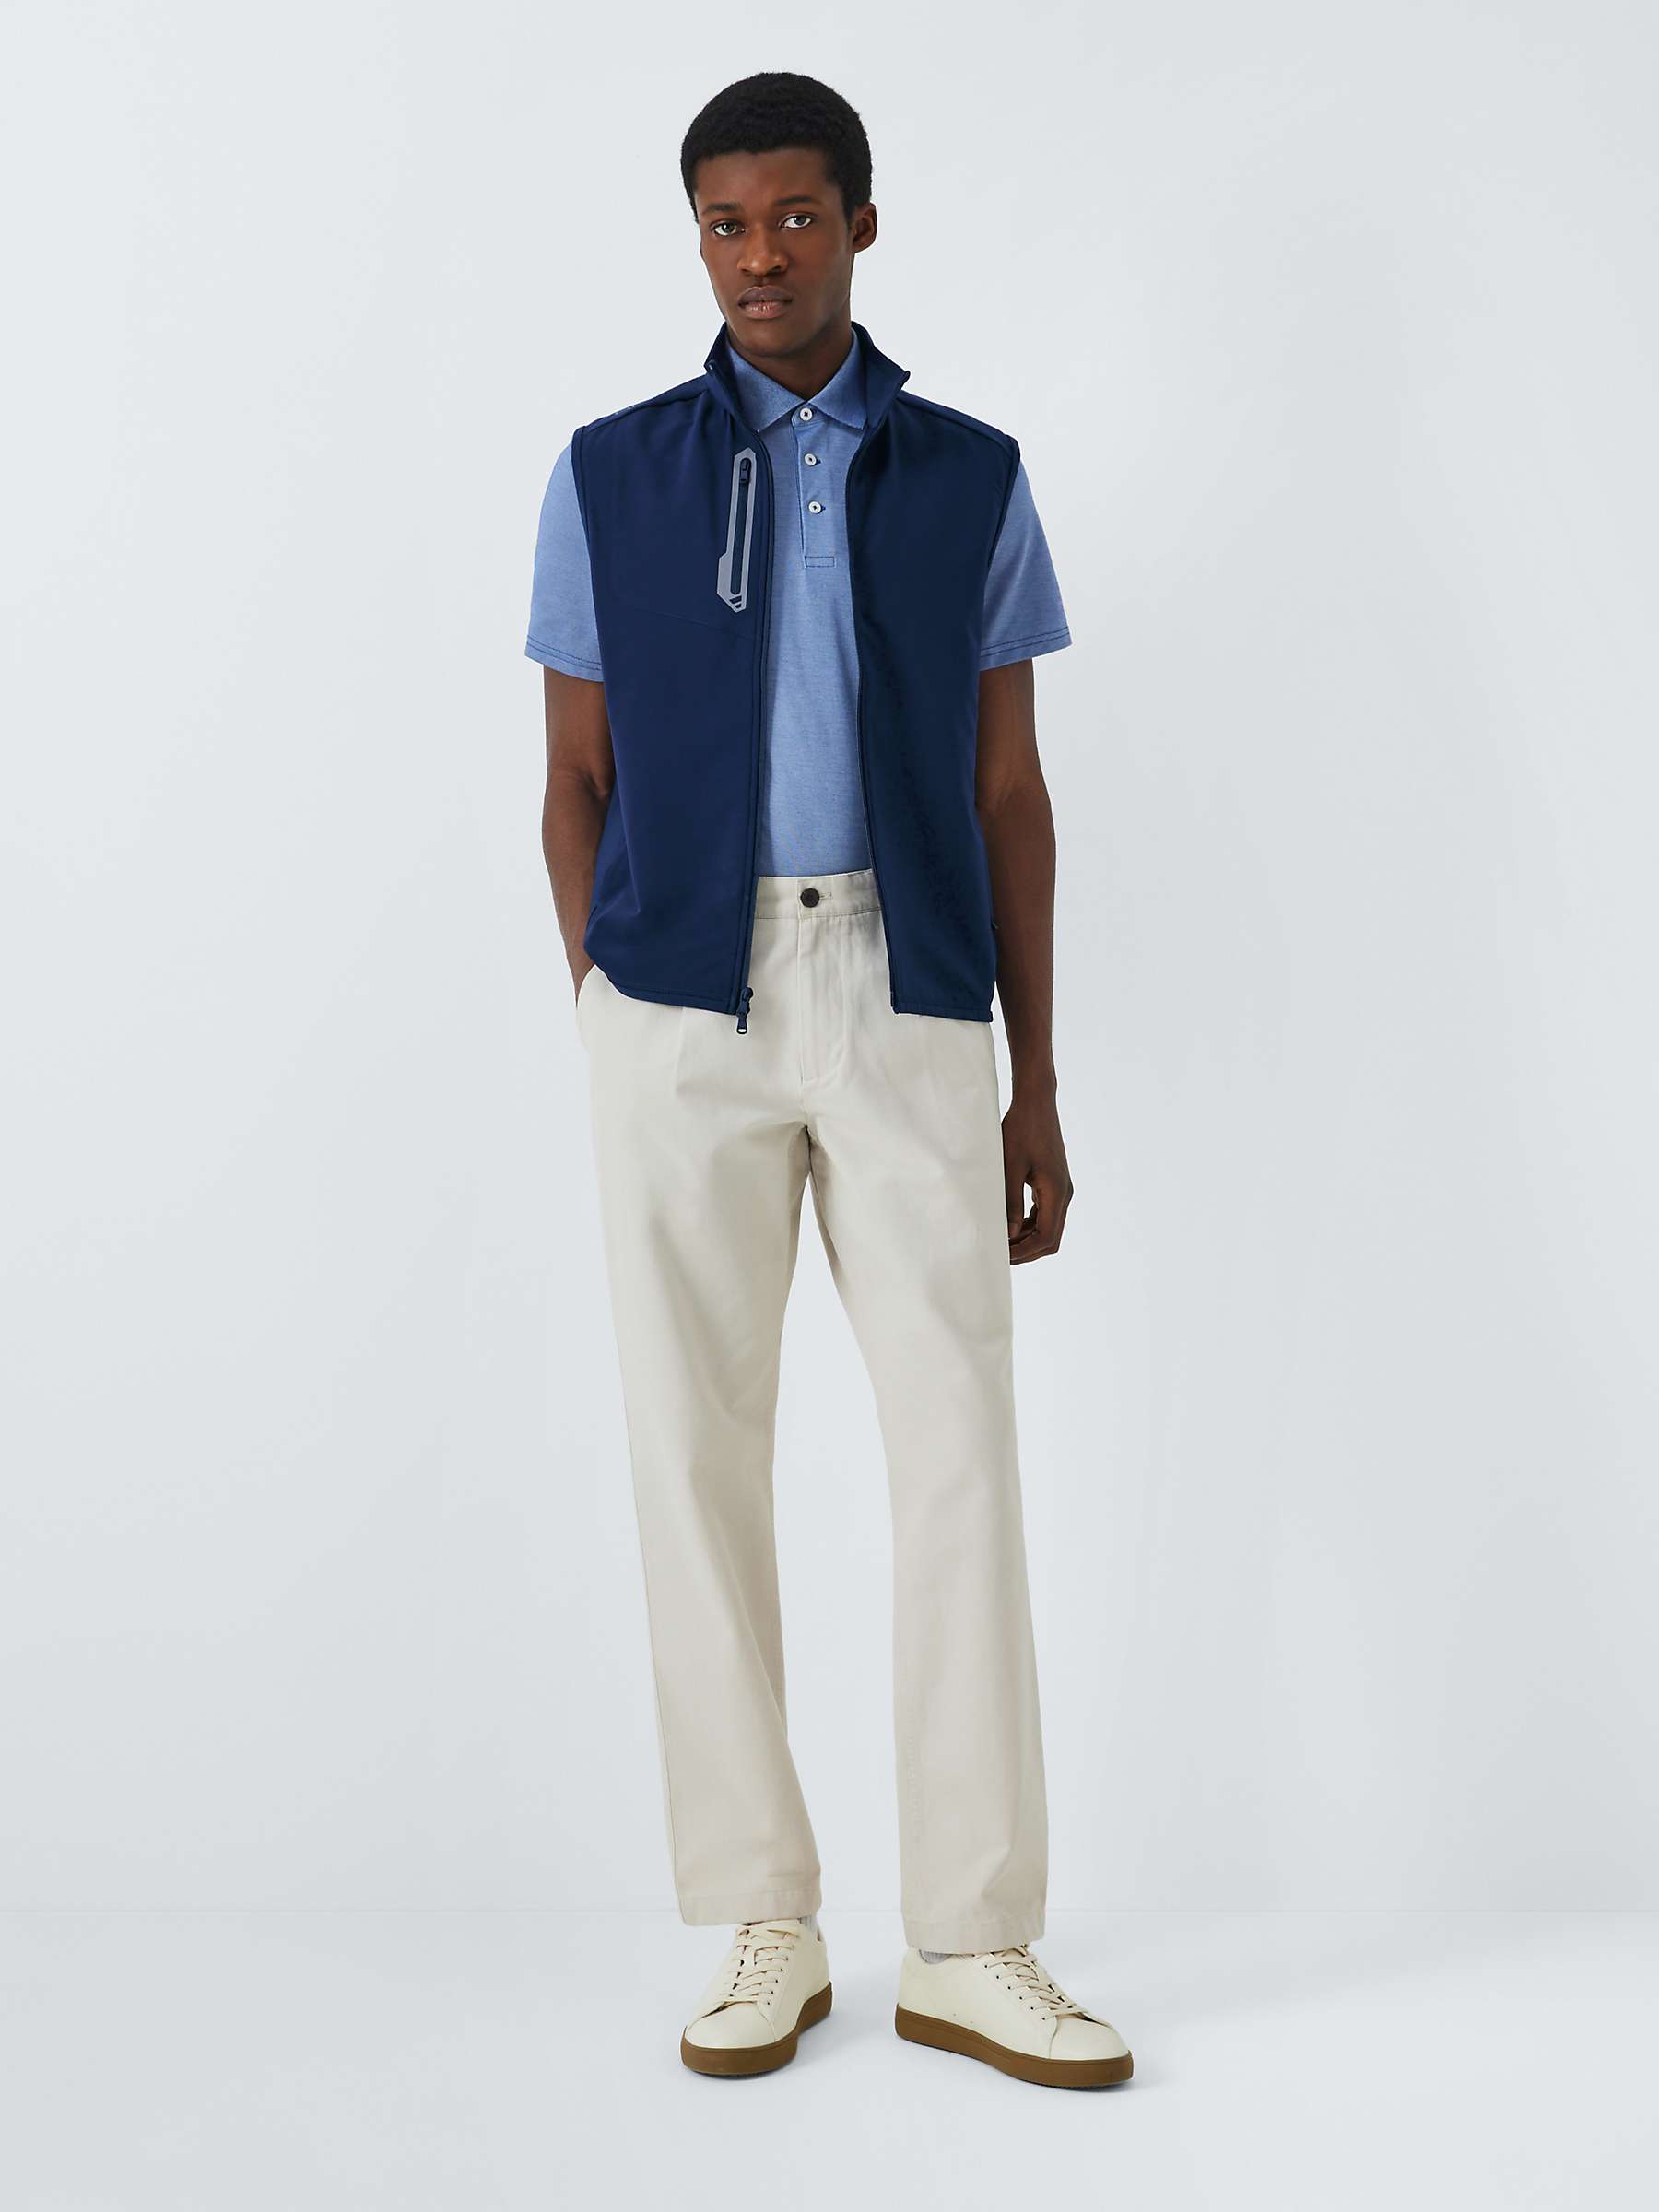 Buy Ralph Lauren Tailored Fit Performance Mesh Polo Shirt Online at johnlewis.com